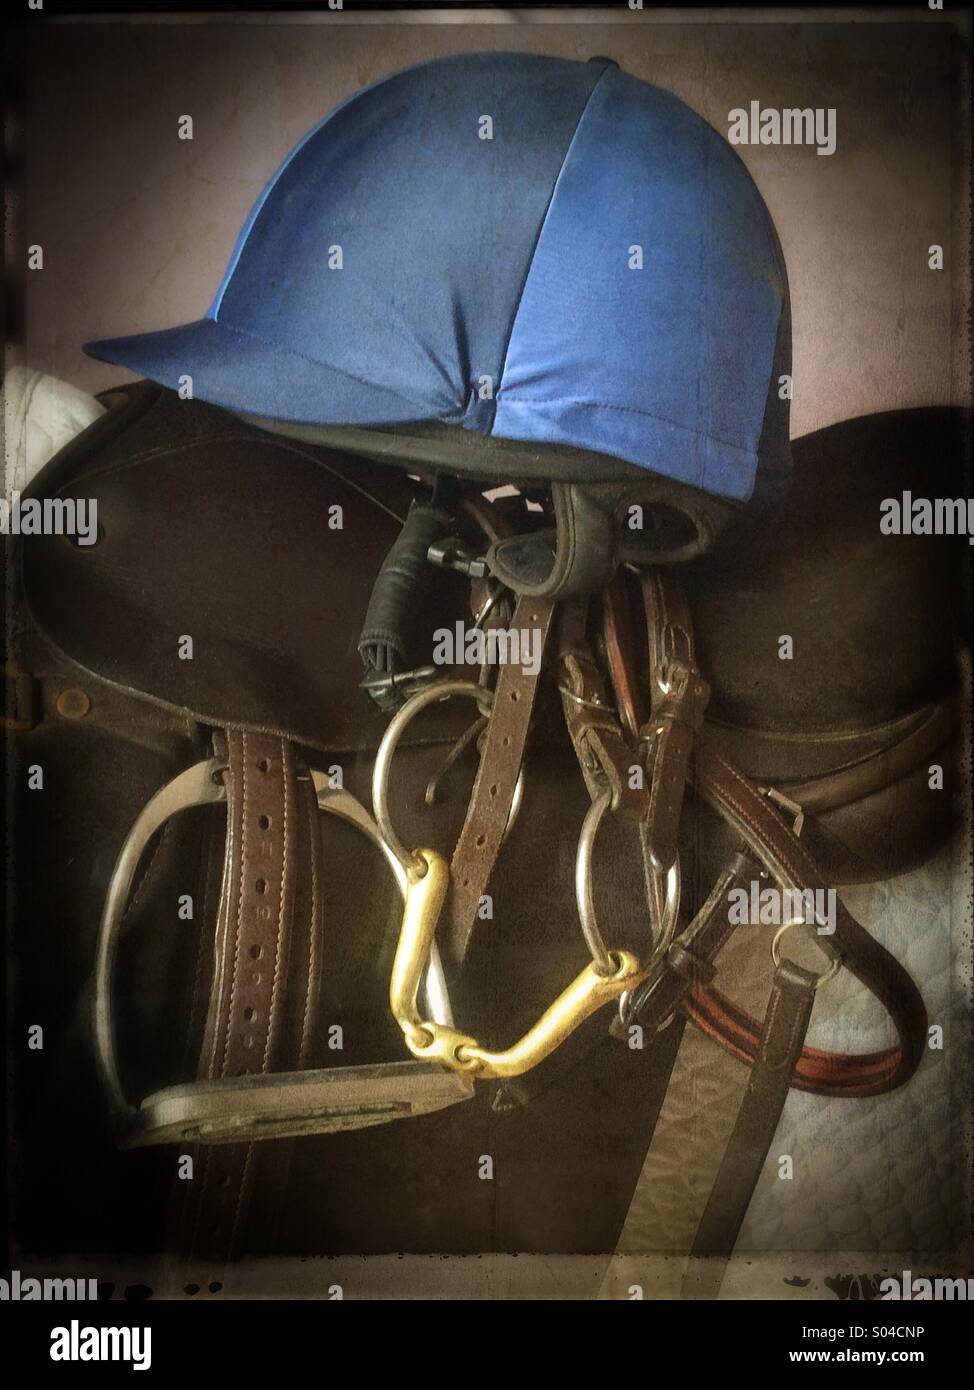 Horse riders hat saddle and bridle Stock Photo